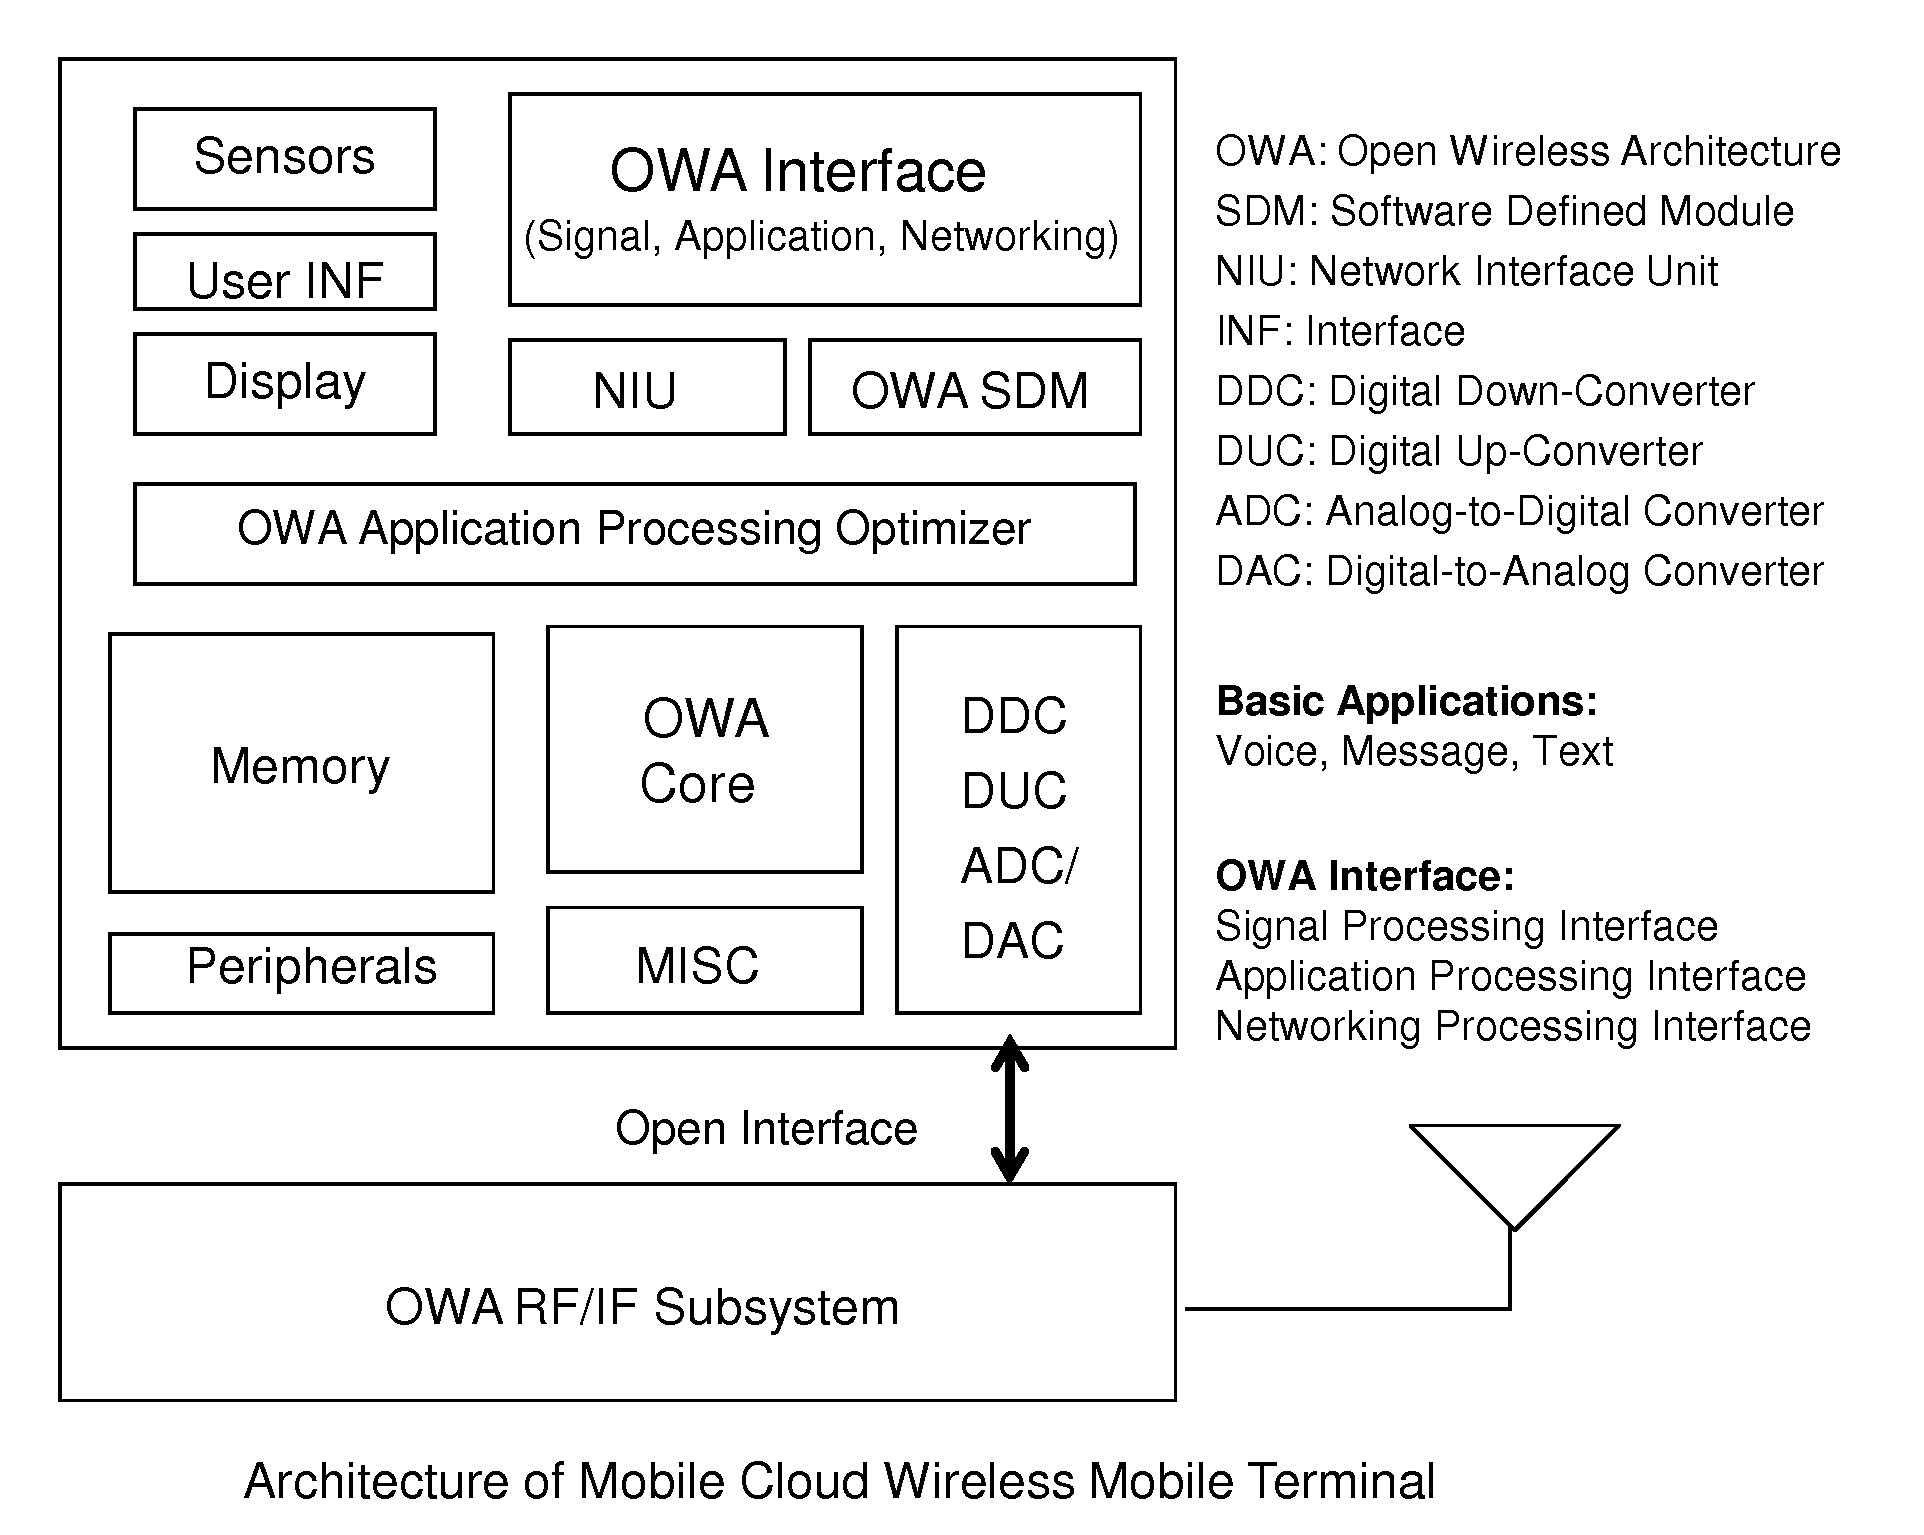 Mobile cloud architecture based on open wireless architecture (OWA) platform